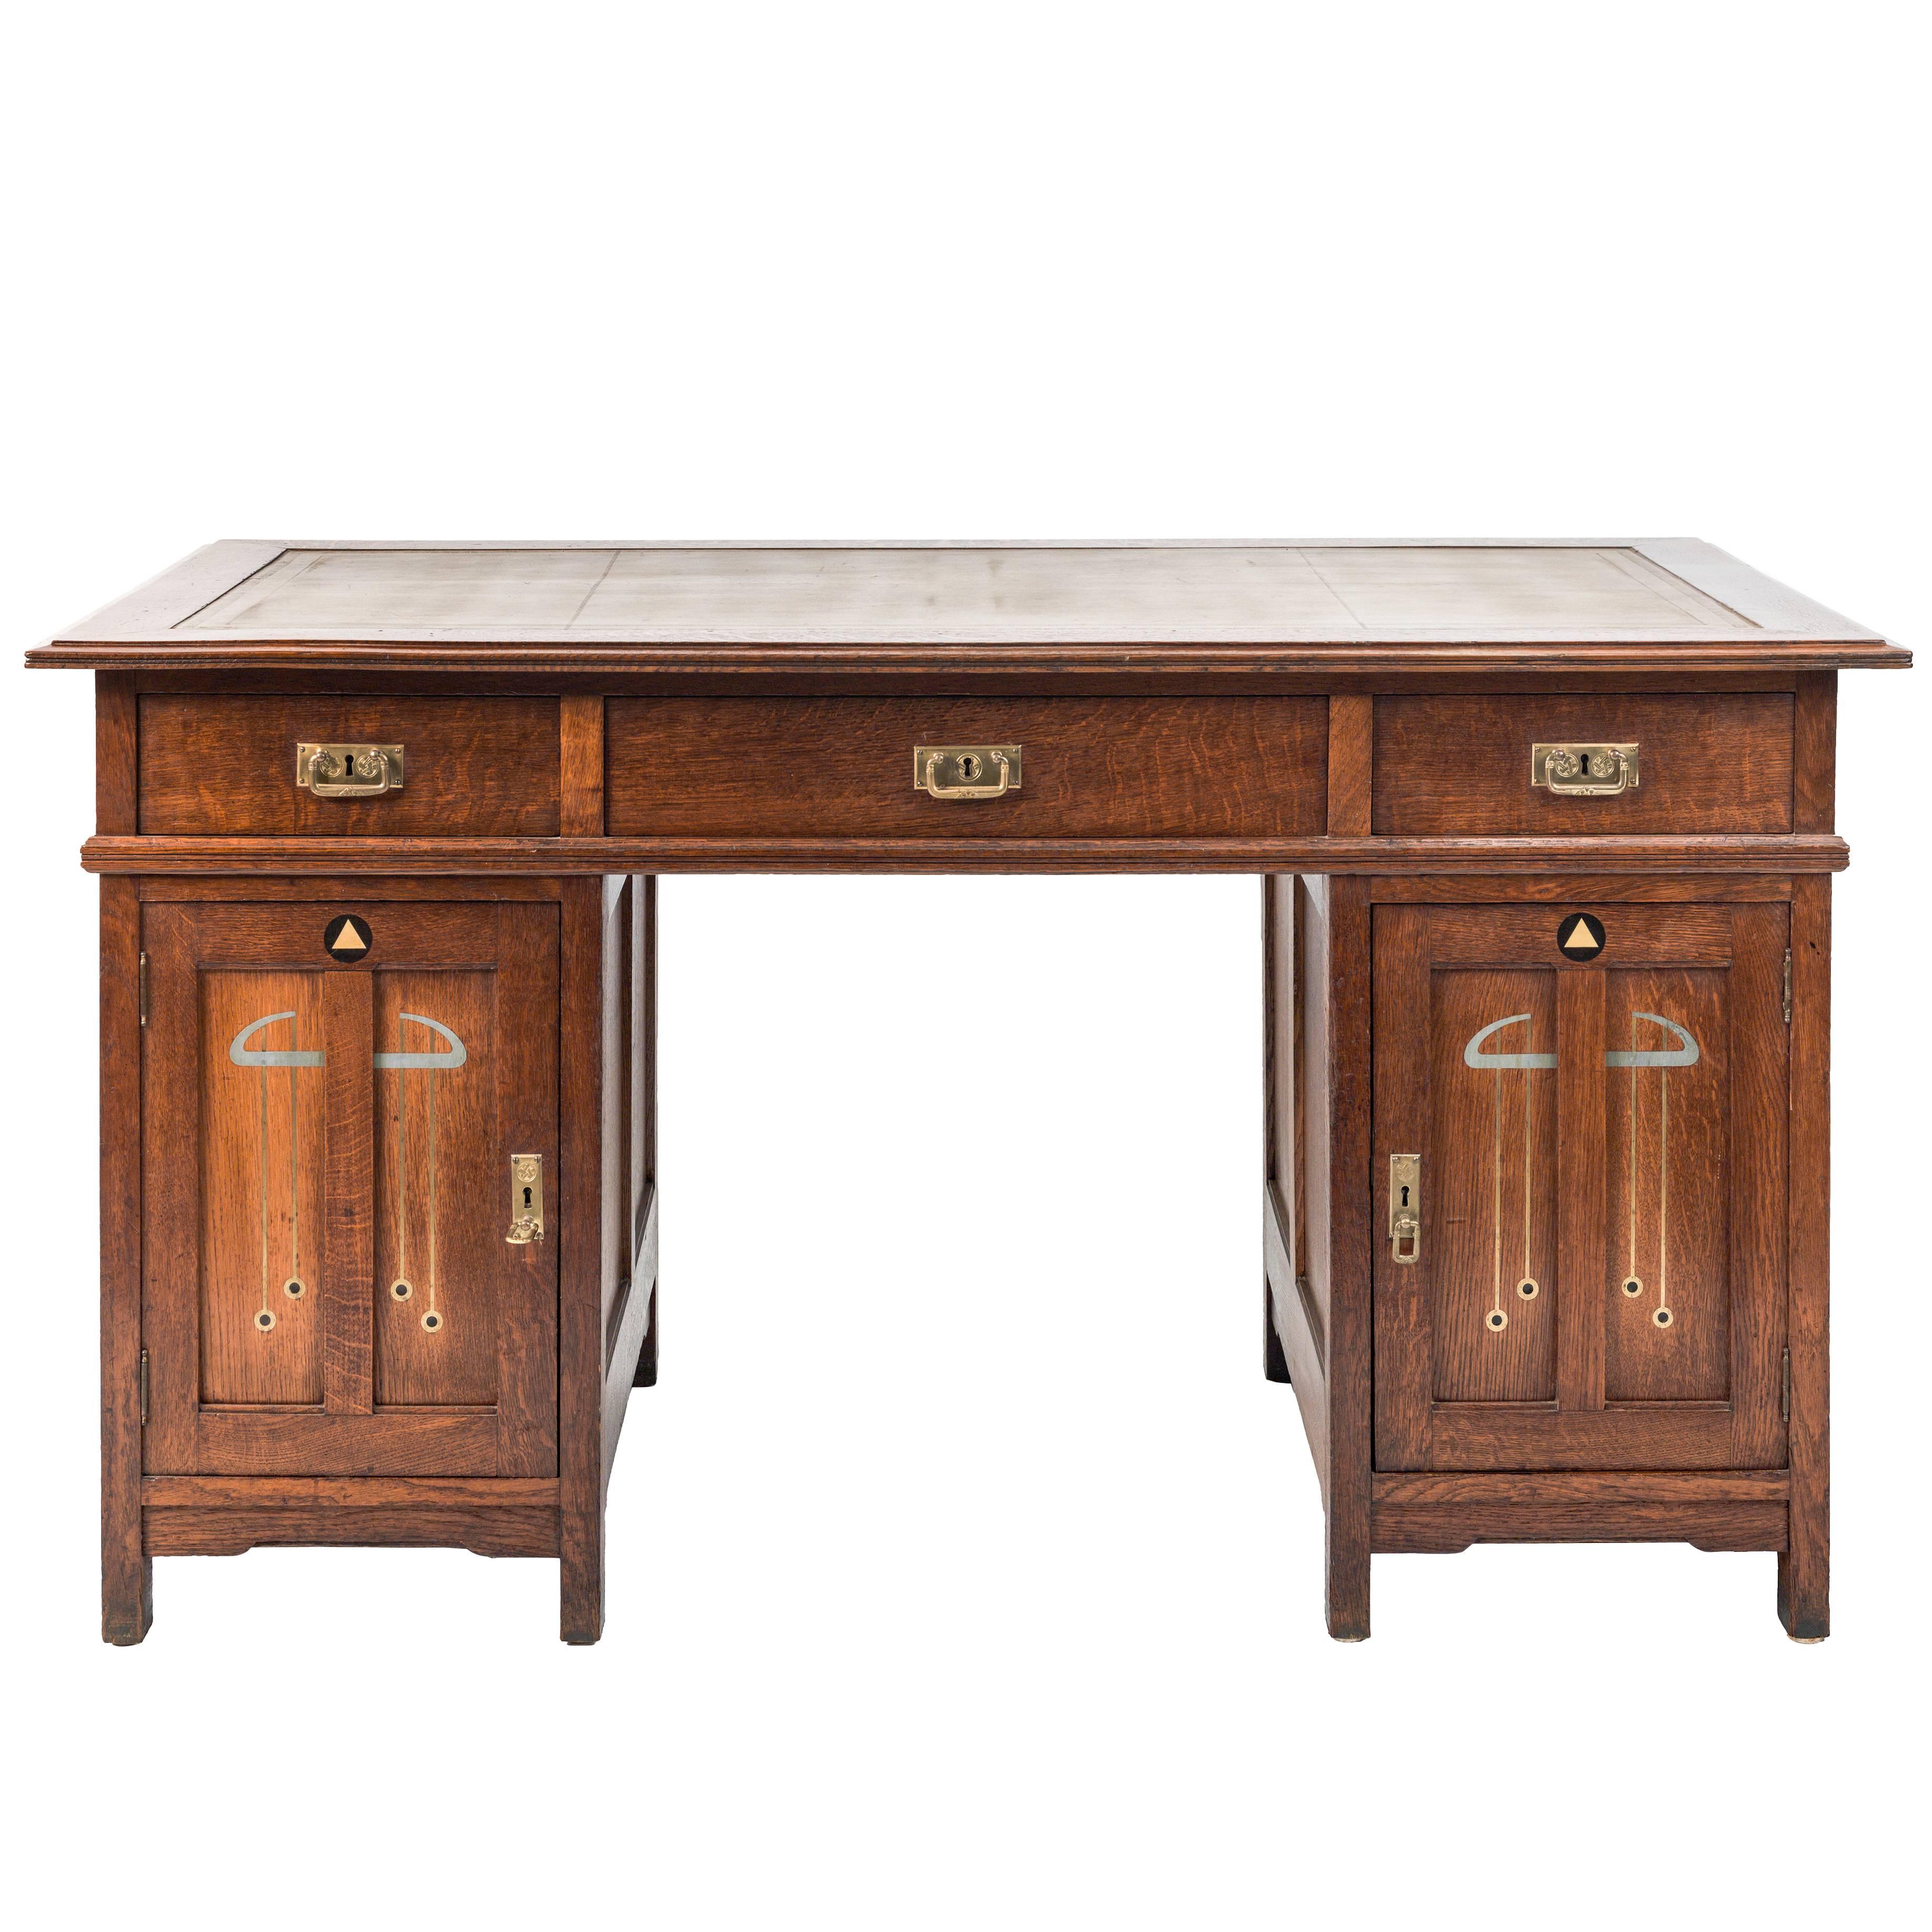 Exceptional Inlaid Secessionist Desk For Sale